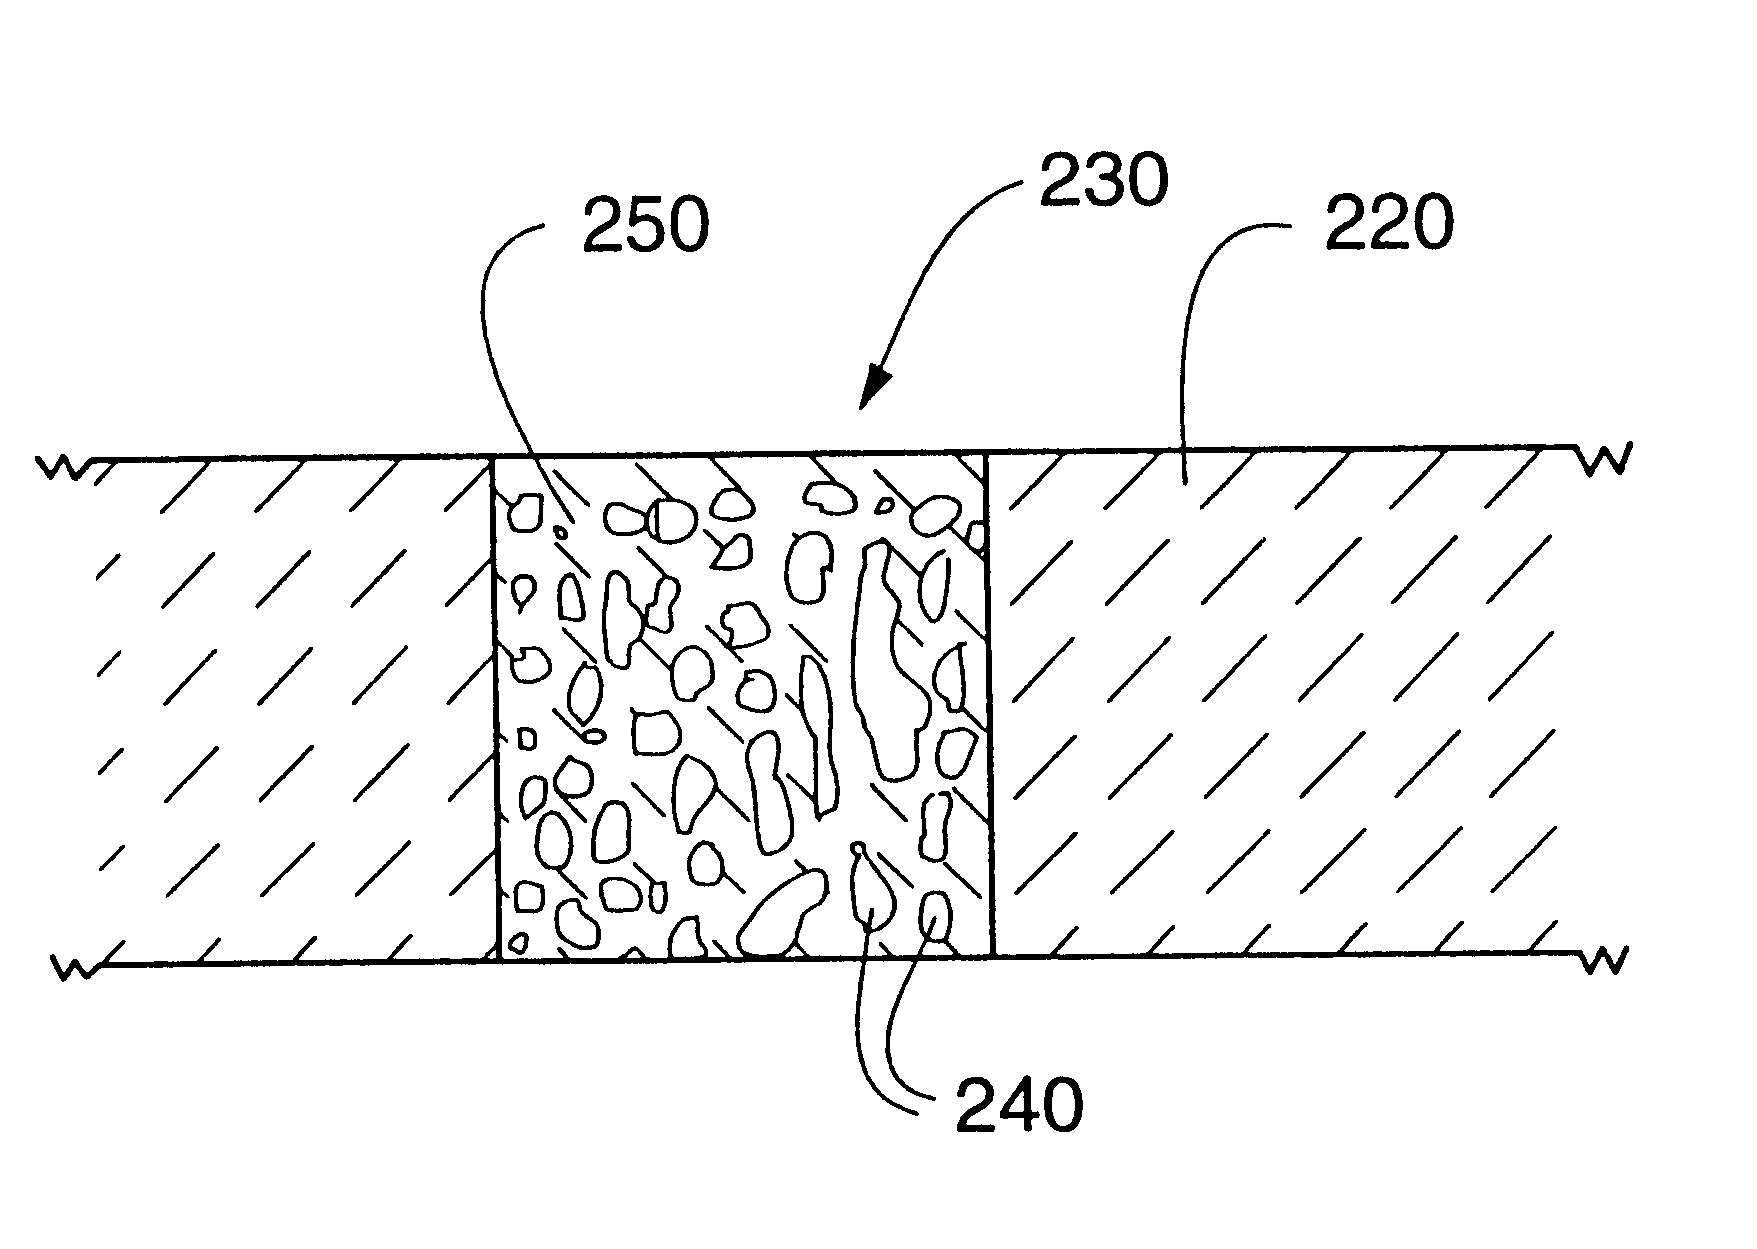 Electronic components incorporating ceramic-metal composites